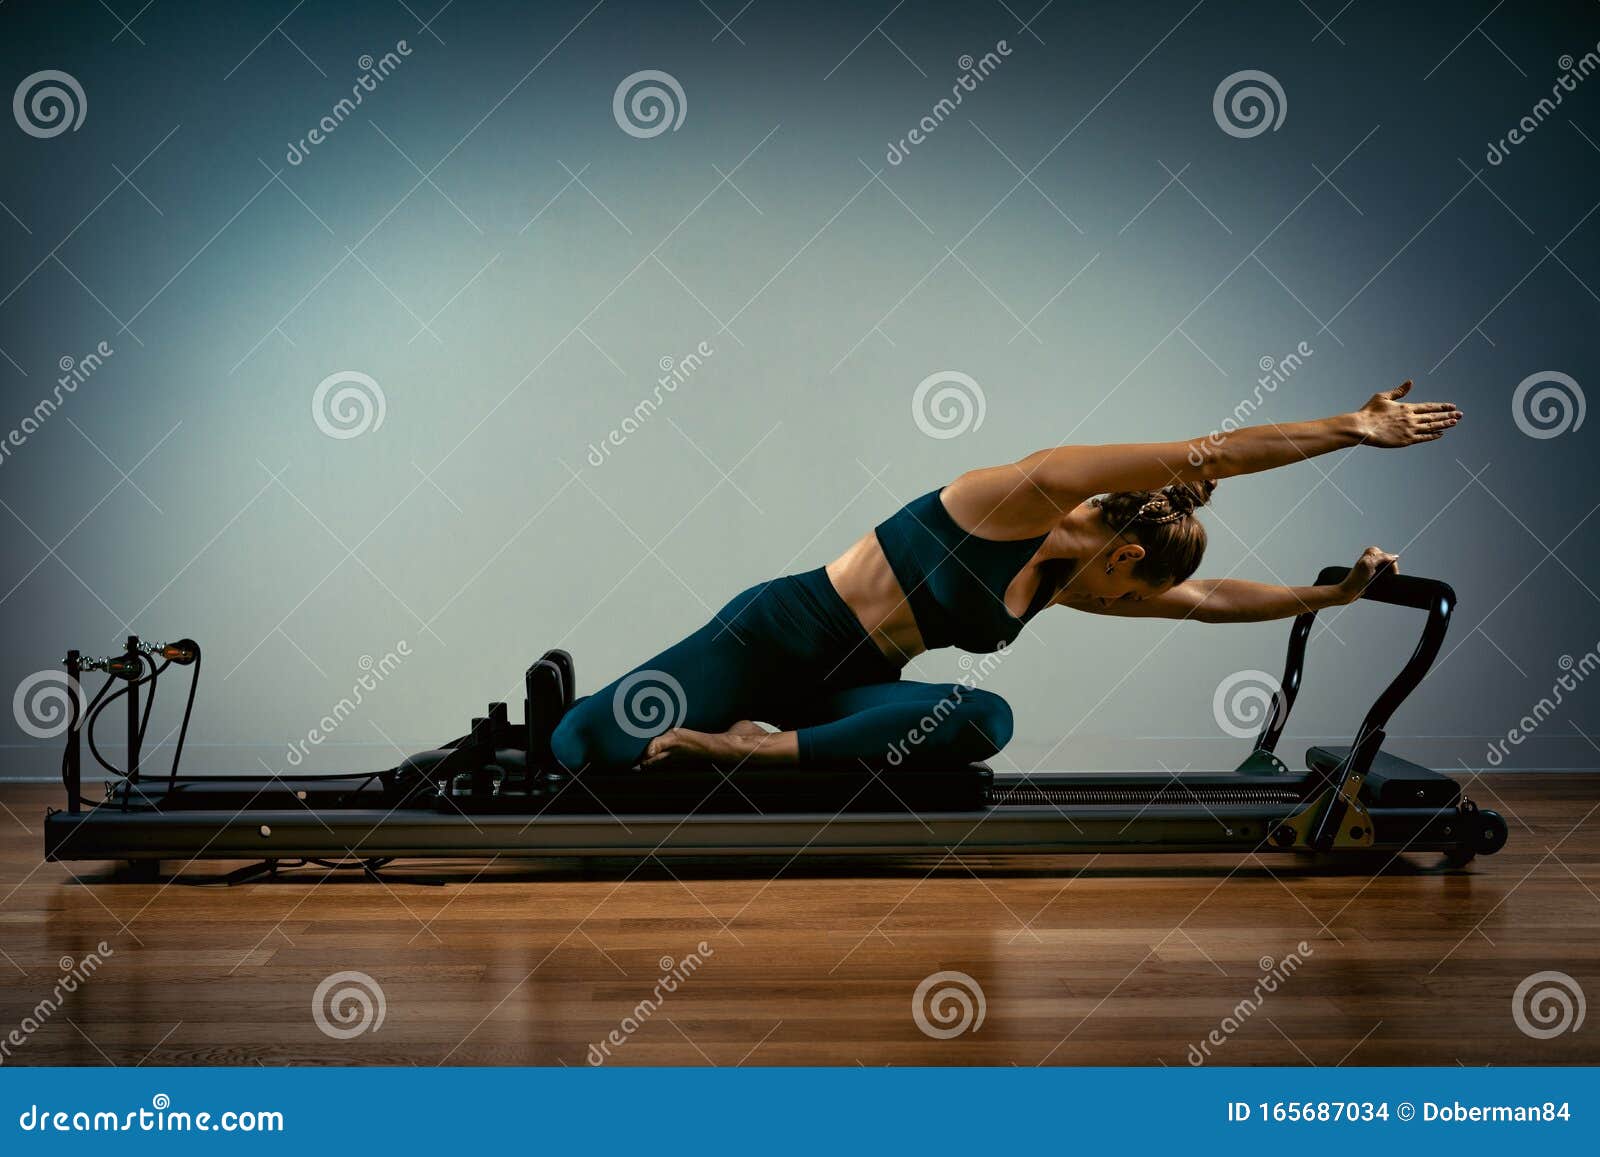 young girl doing pilates exercises with a reformer bed. beautiful slim fitness trainer on reformer gray background, low